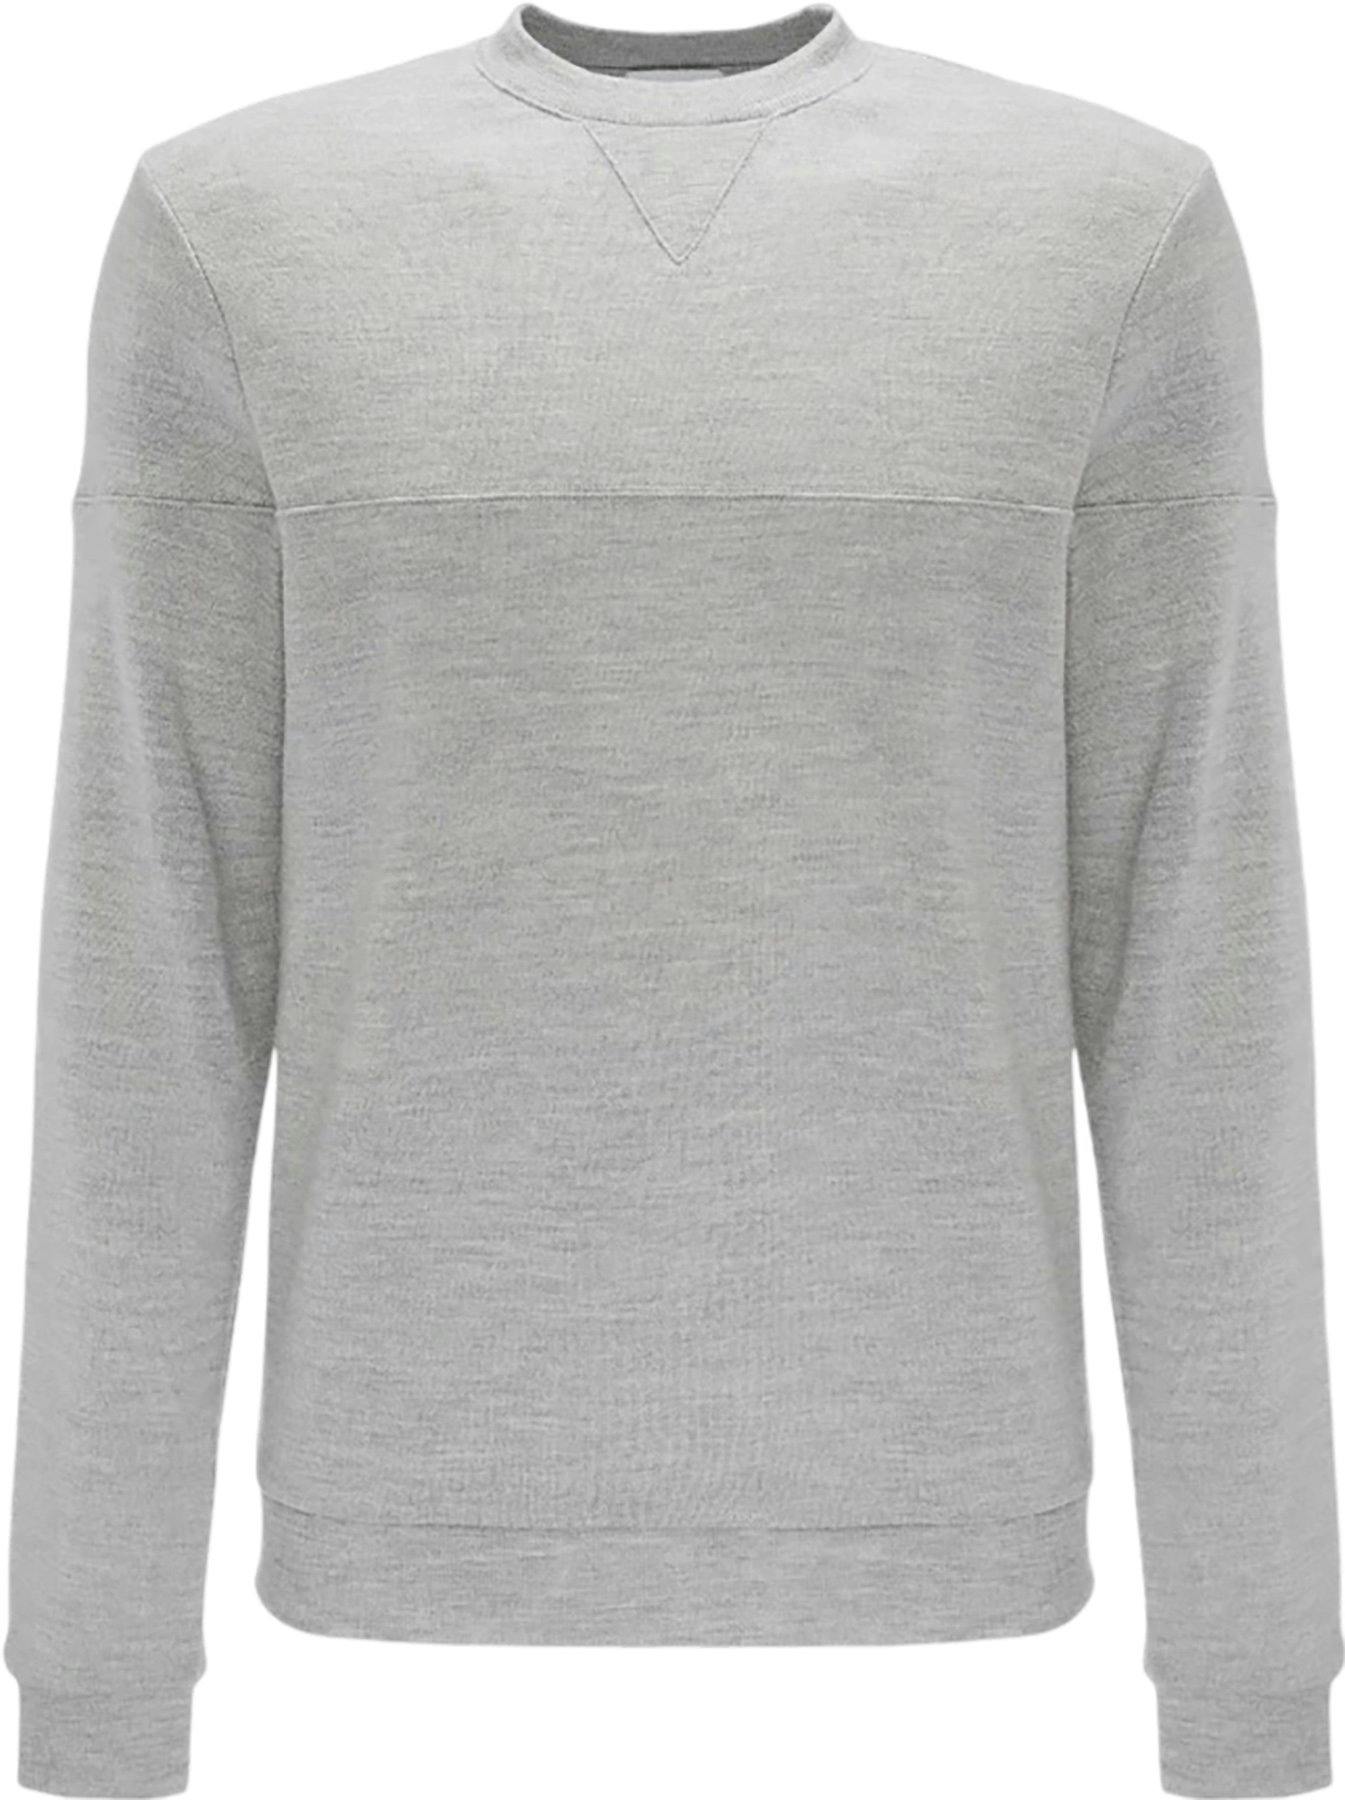 Product image for Tind Crewneck Sweater - Men's